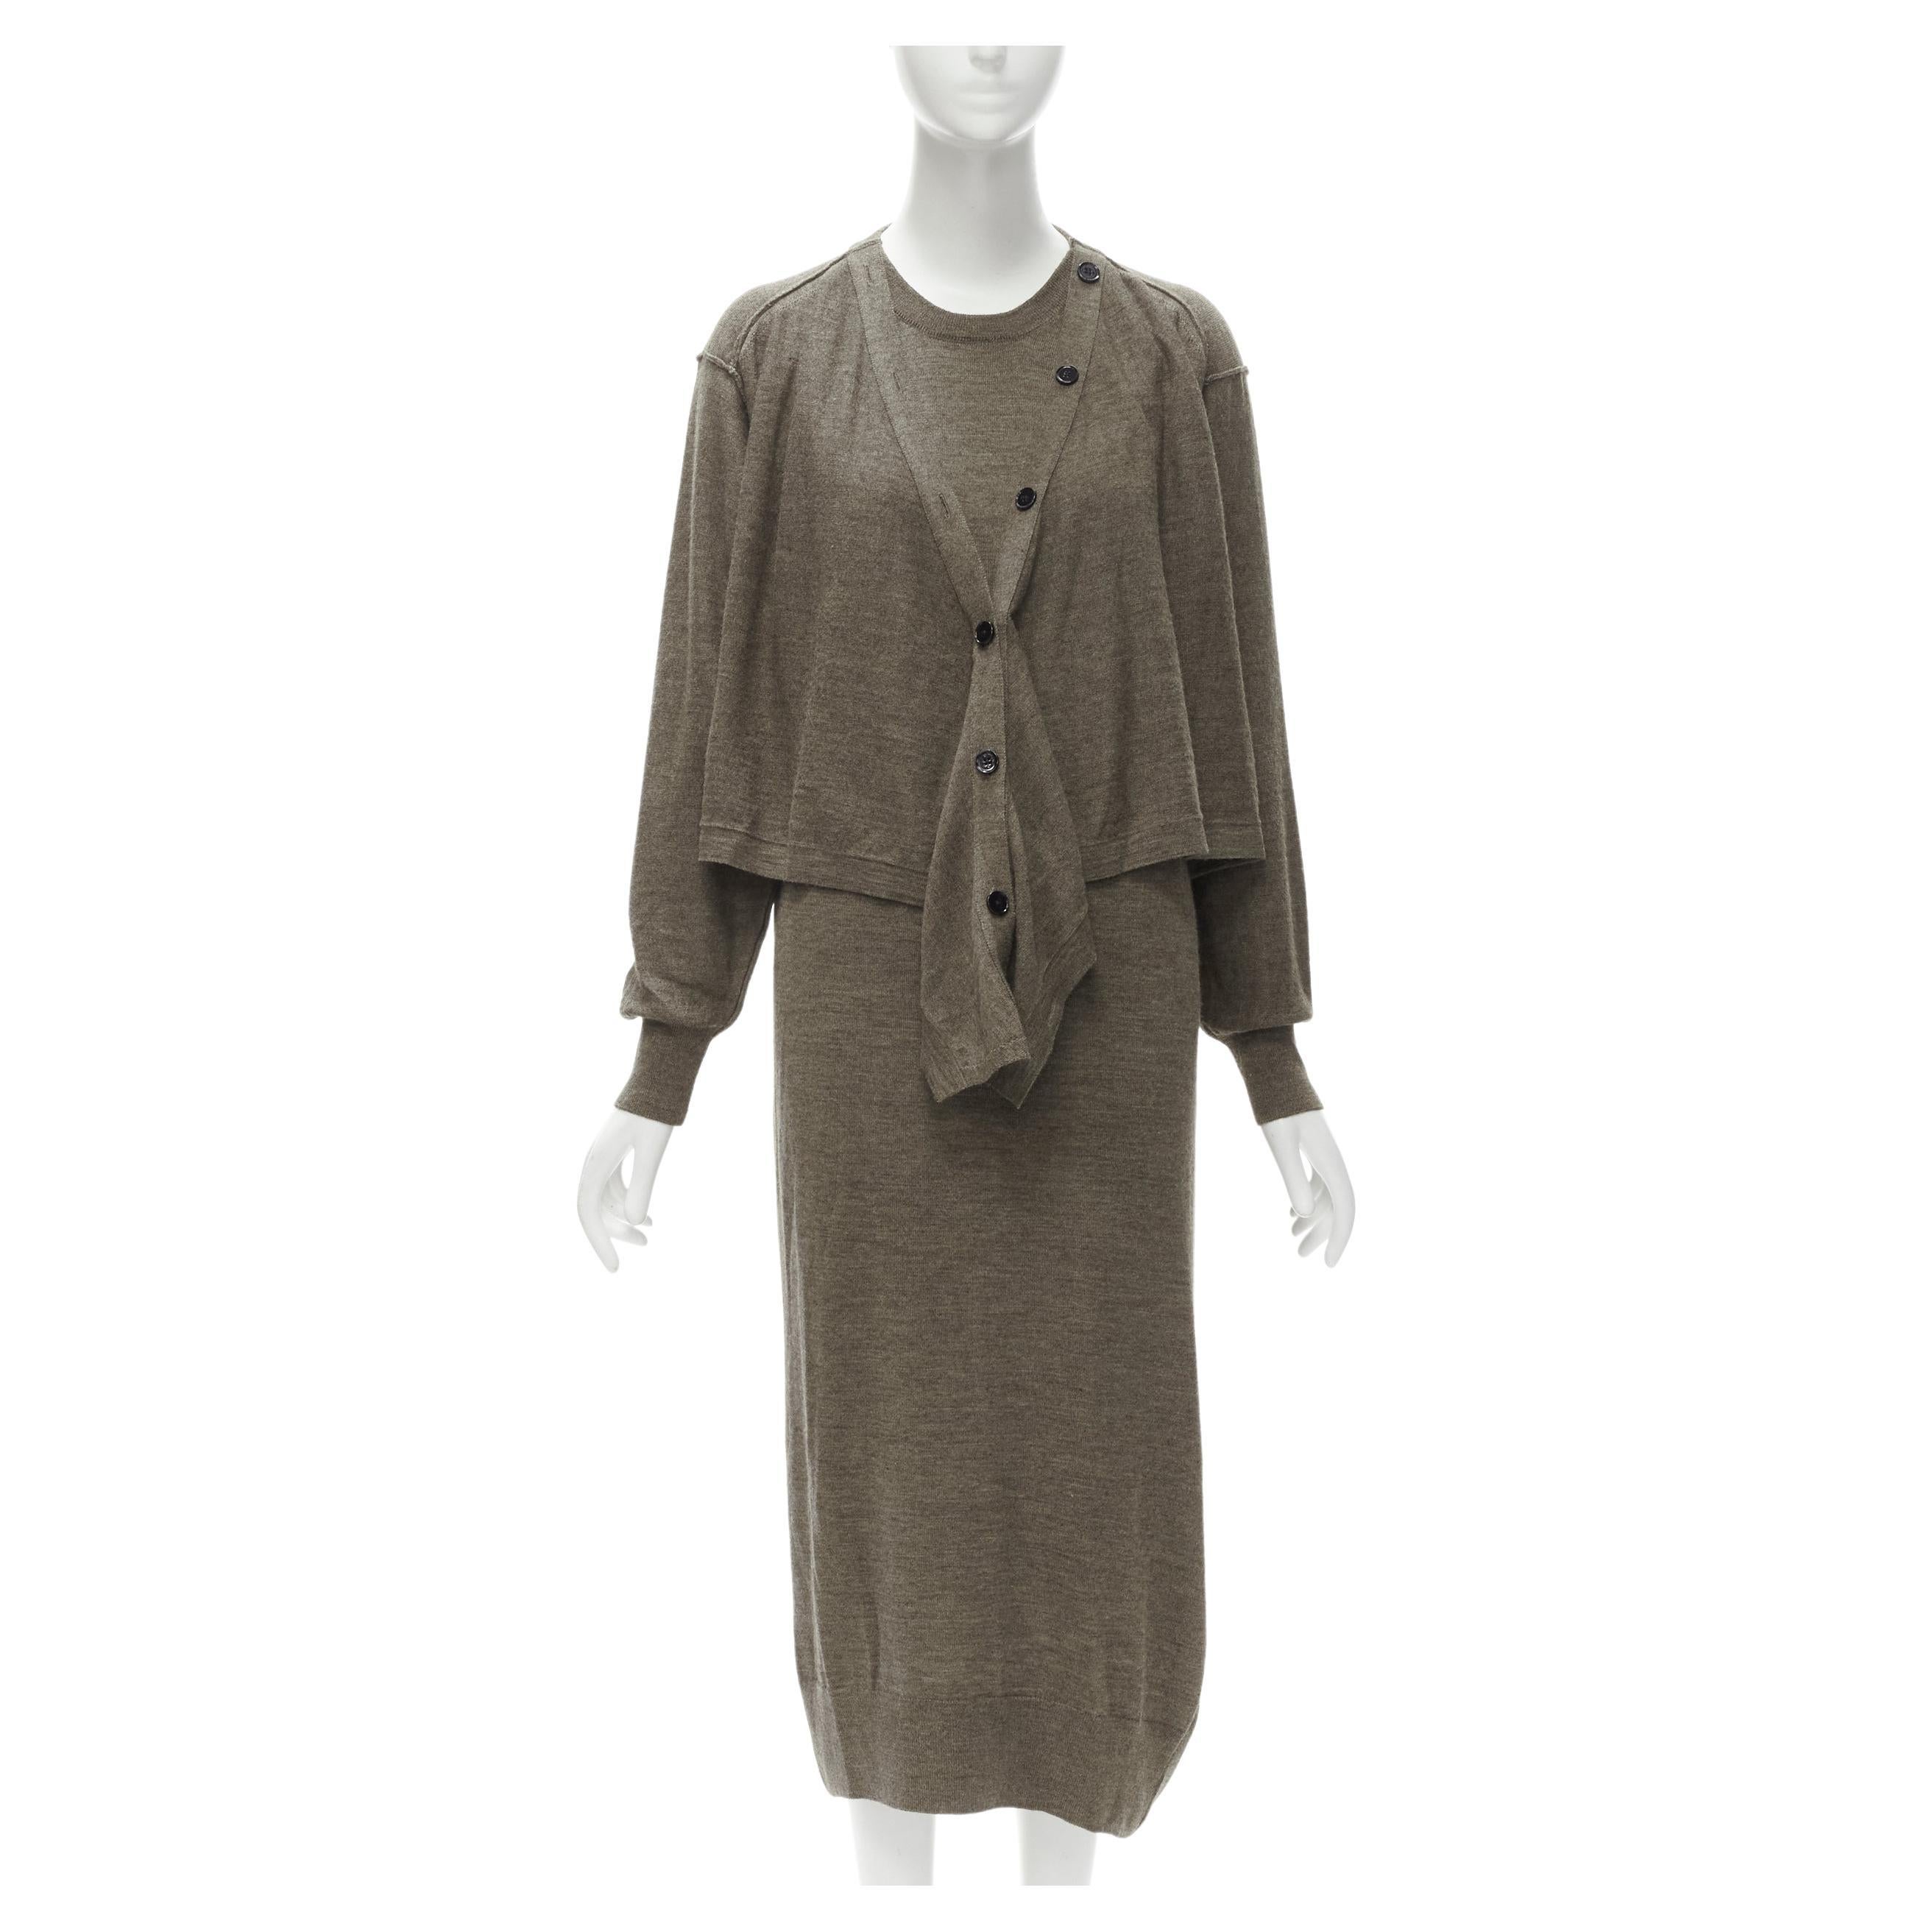 LEMAIRE brown merino wool blend tie front cardigan sweater dress XS For Sale